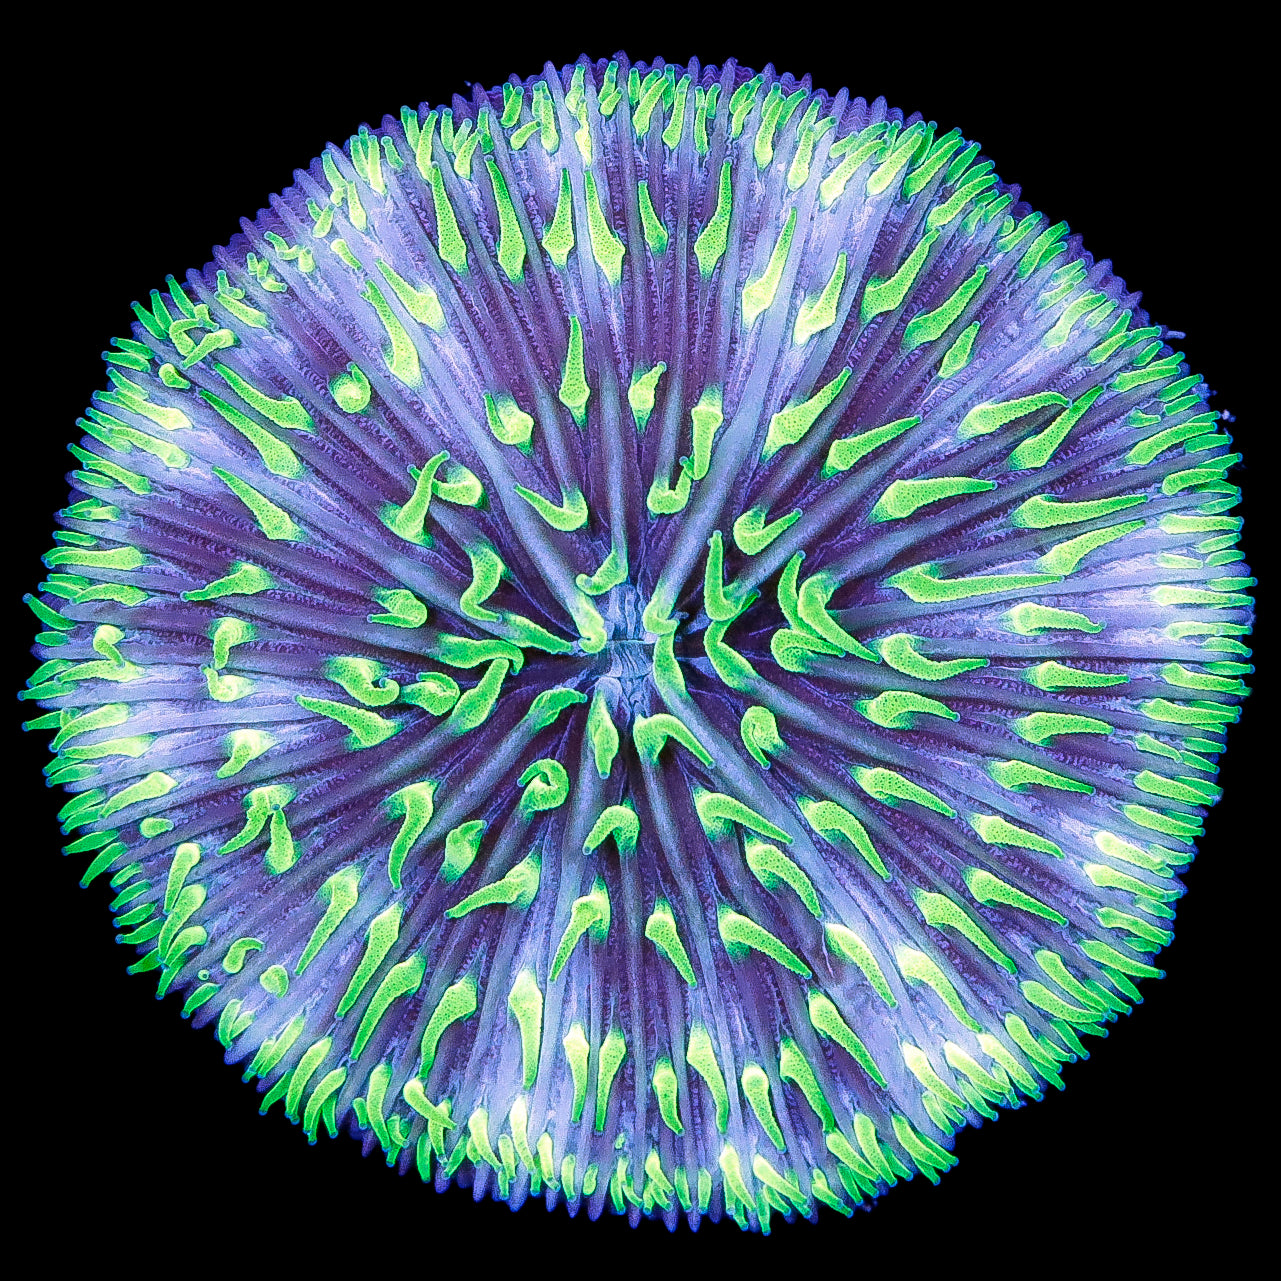 Neon Polyp Aussie Fungia Plate Coral